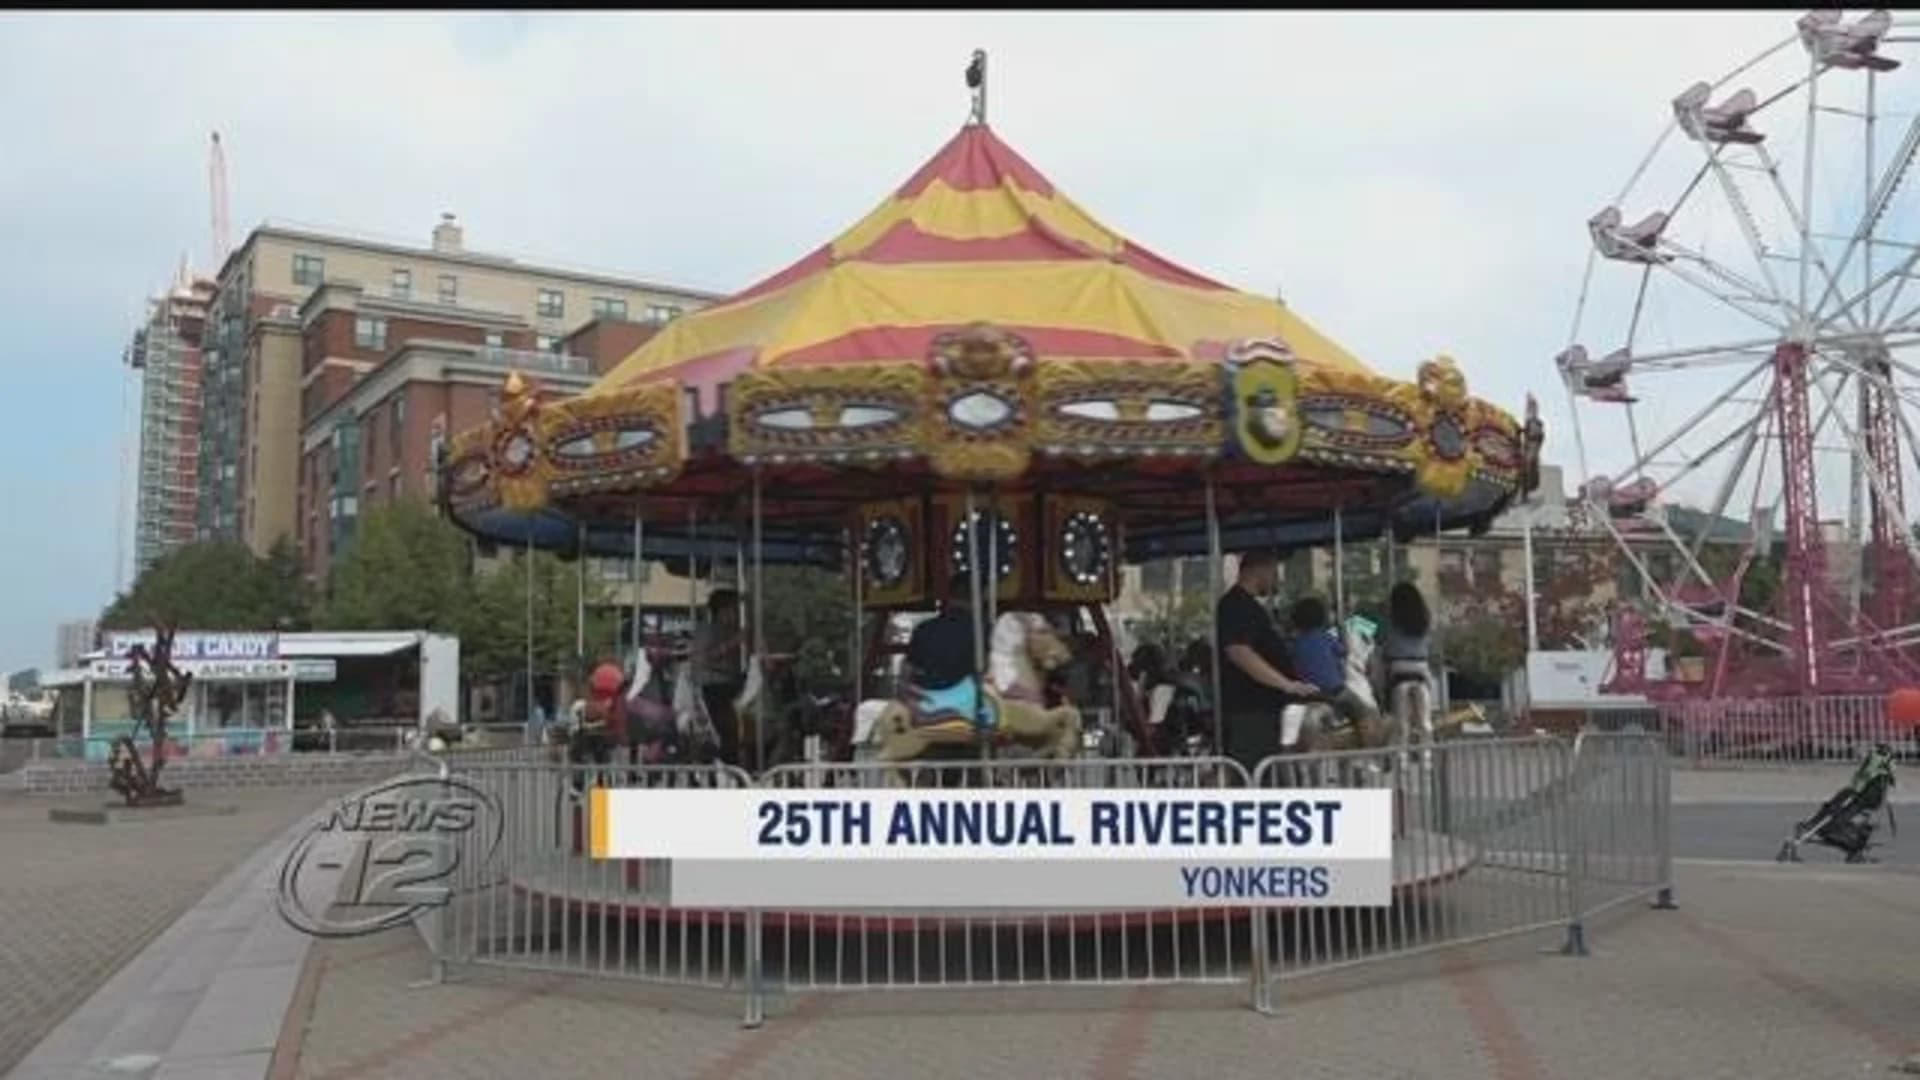 Yonkers Riverfest brings food, rides and fun to city's waterfront